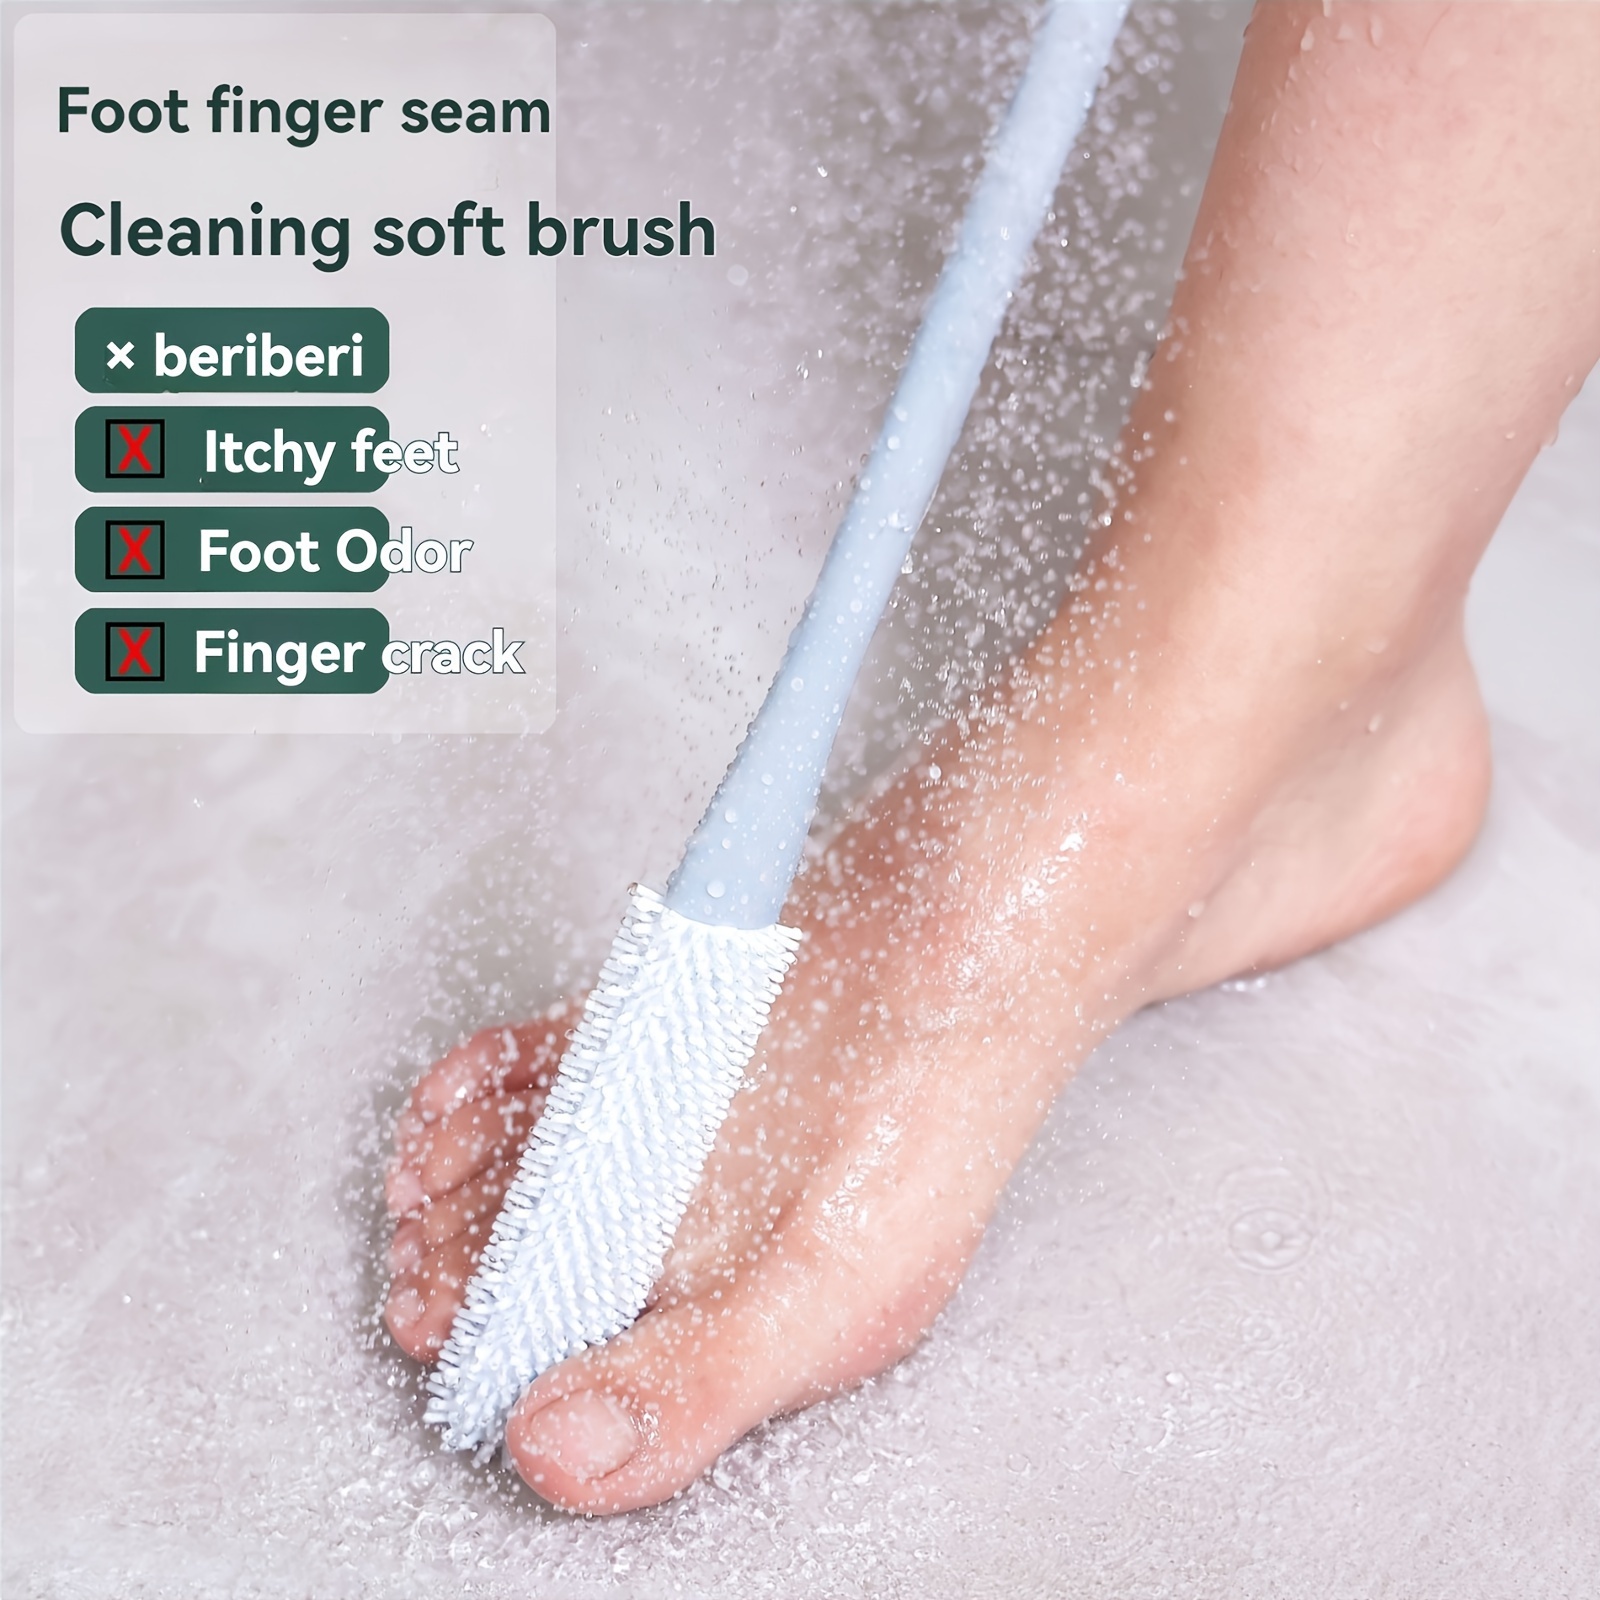 

2pcs/1set Multifunctional Toe Cleaning Brush And Anti-itch Brush 1 Set, Foot Dead Skin Removal, Foot Anti-itch Brush, Long Handle Foot Brush, Shower Tool